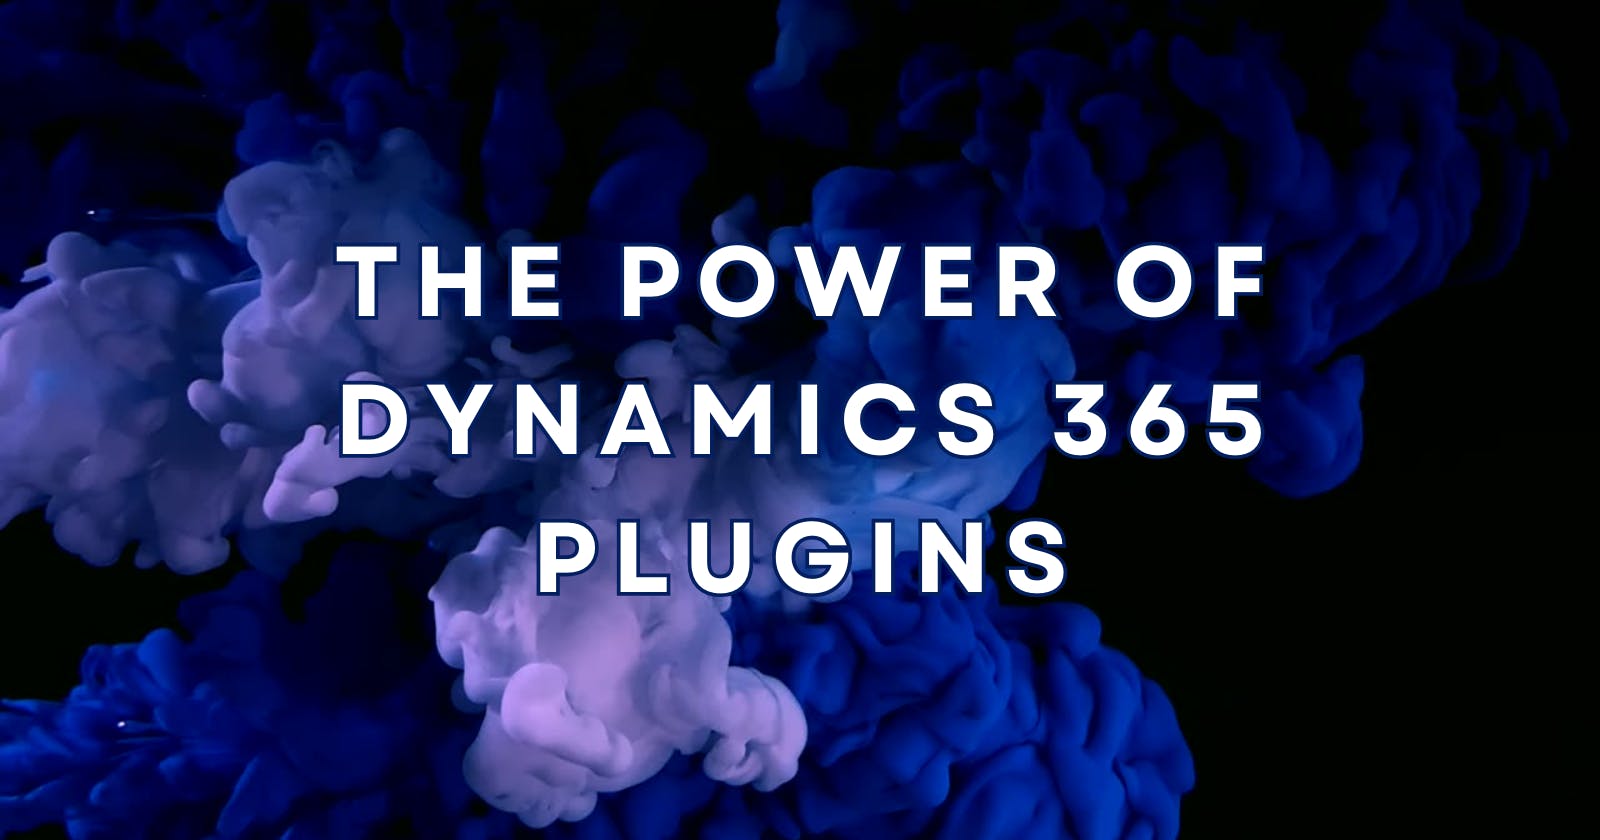 The Power of Dynamics 365 Plugins